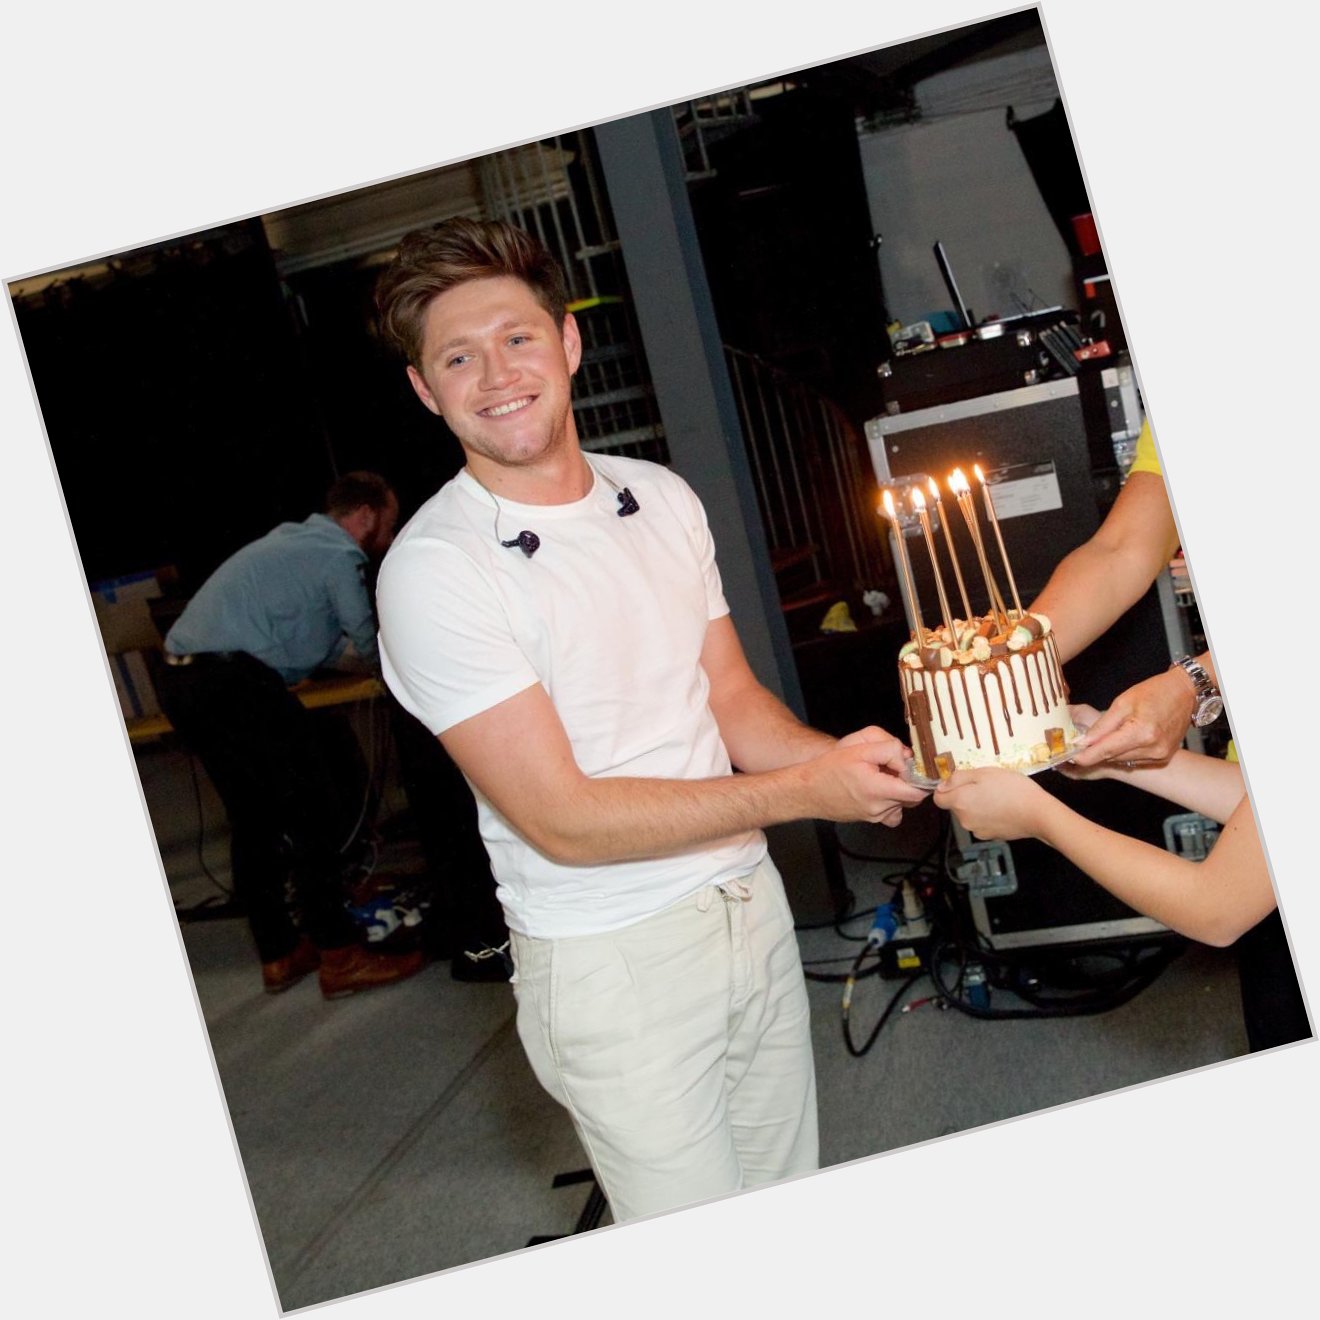 Imagine if niall horan himself wished you a happy birthday 